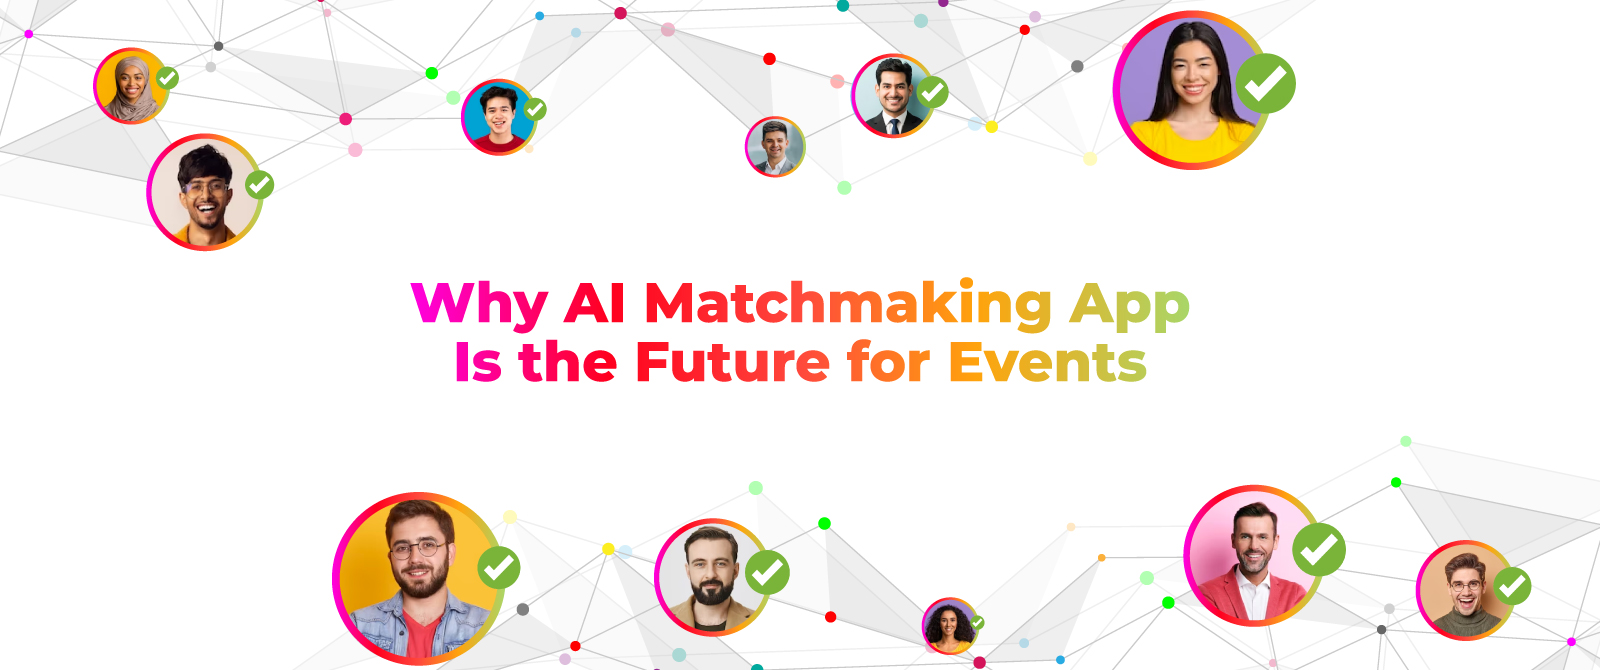 Why AI Matchmaking App Is the Future for Events